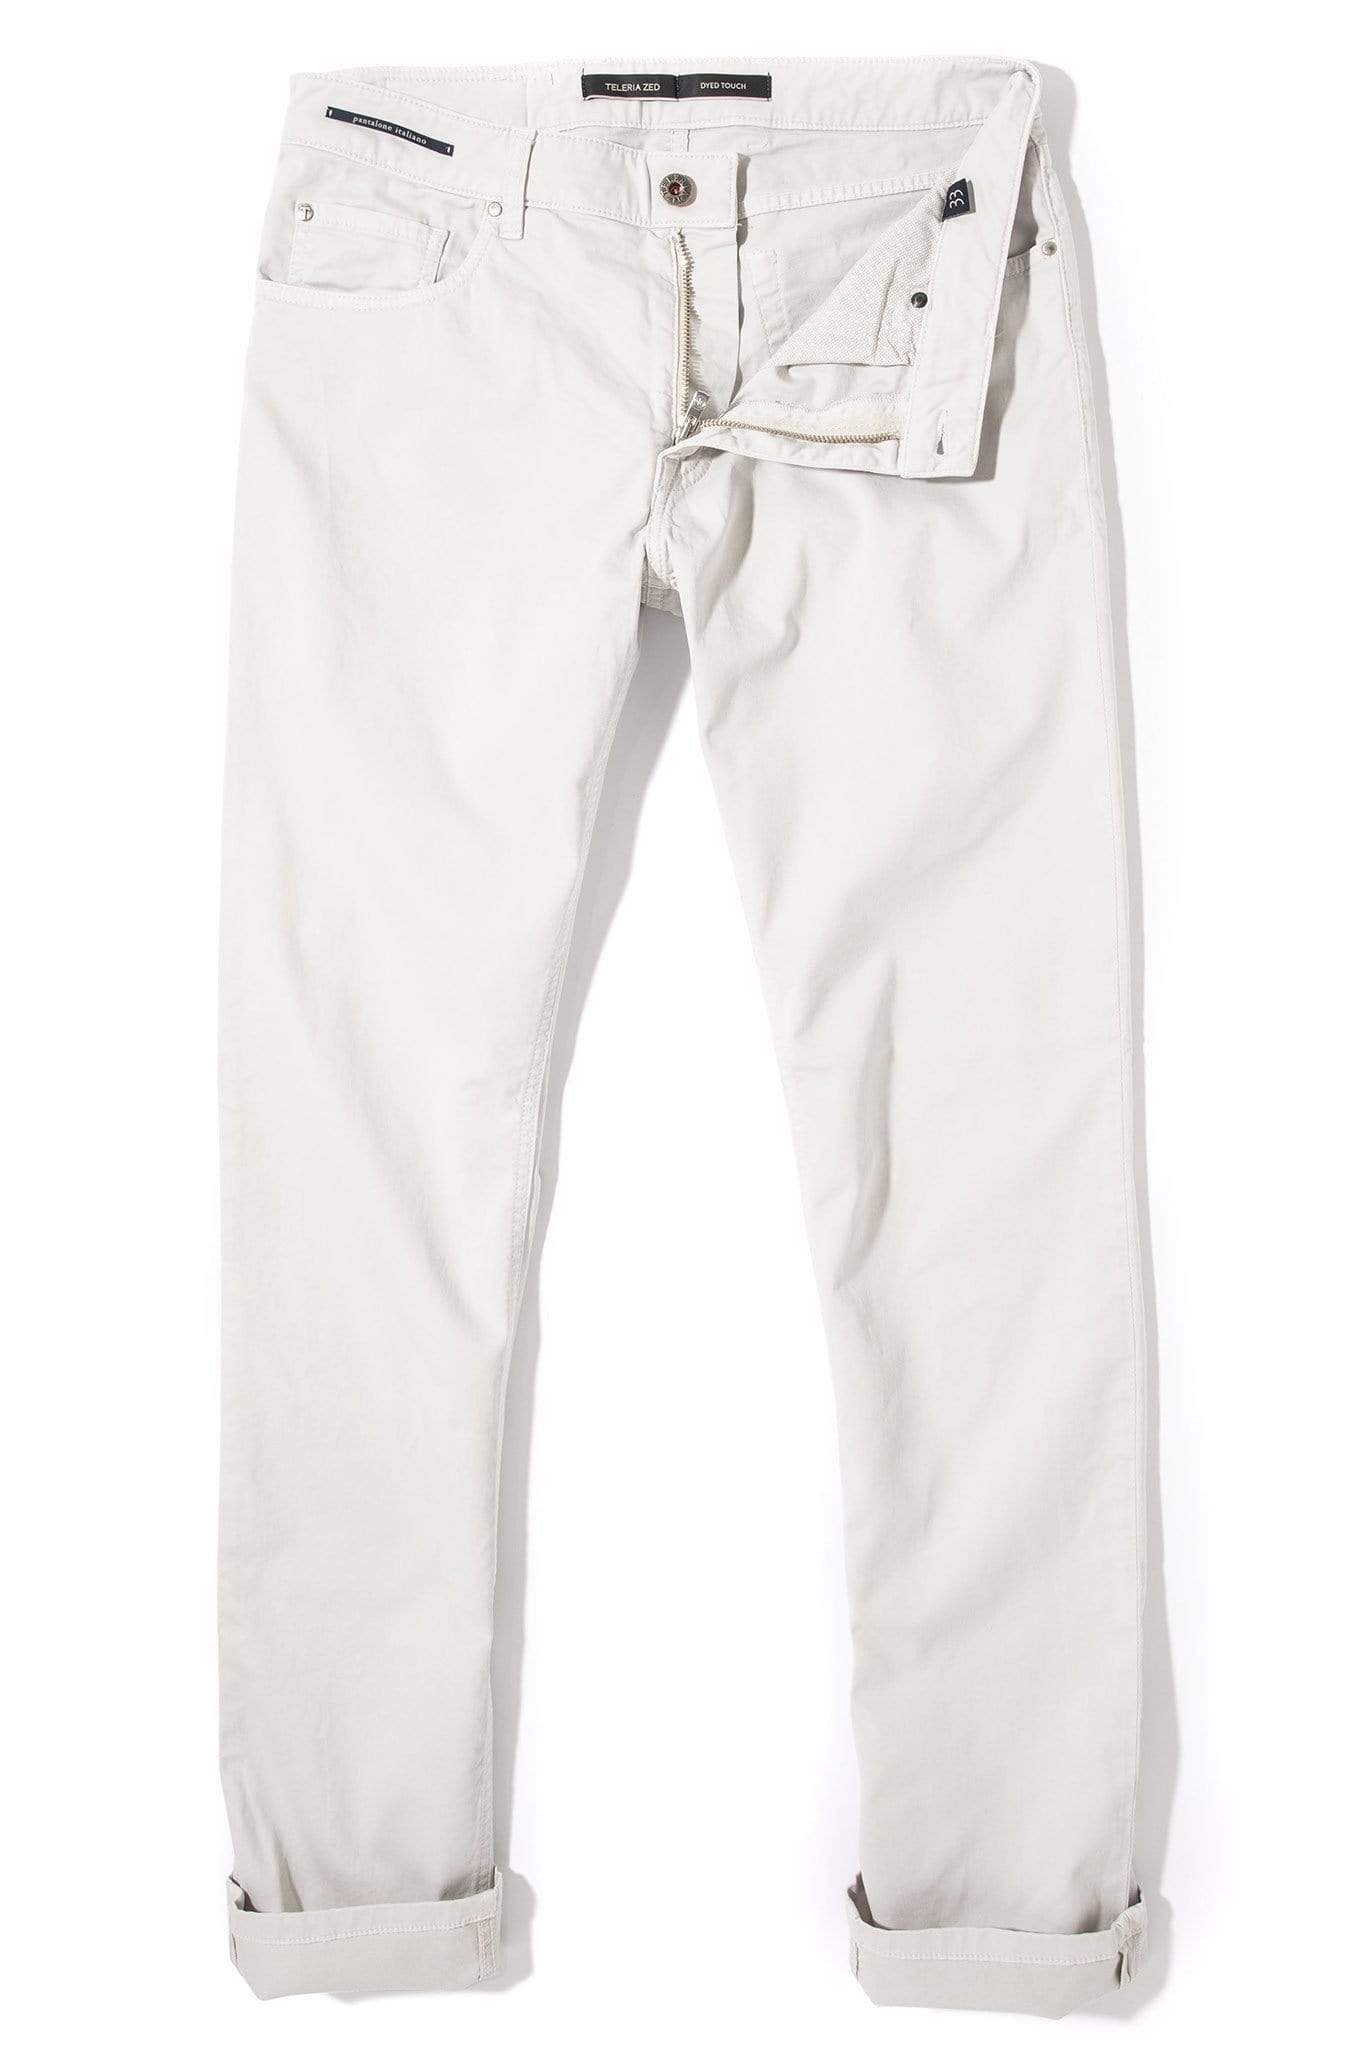 Yuma Soft Touch In Sasso | Mens - Pants - 5 Pocket | Teleria Zed